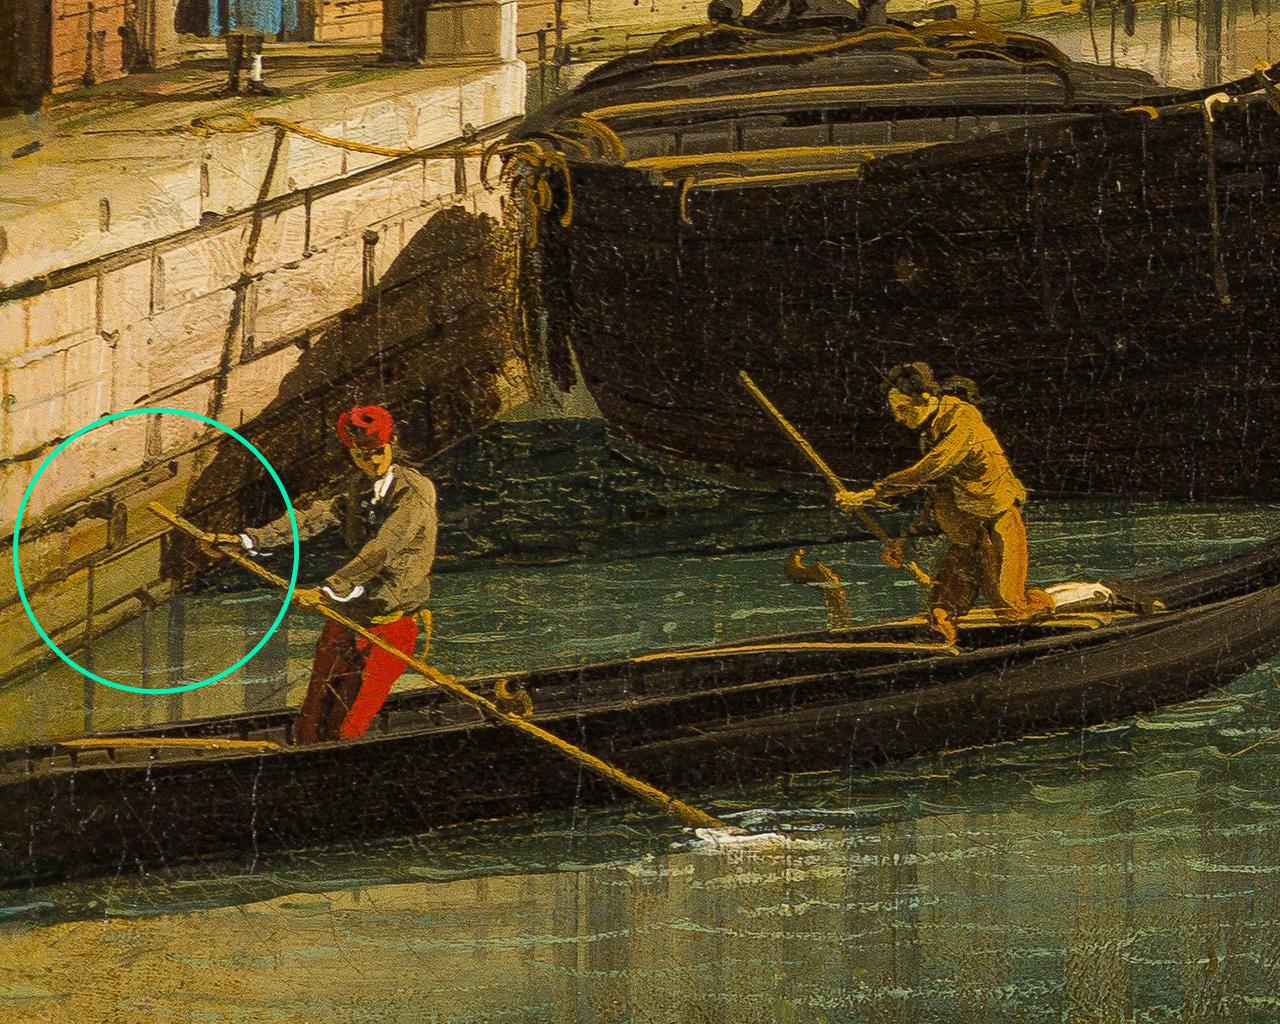 A close-up of a painting by Canaletto showing a line of green algae on the wall facing the Grand Canal in Venice